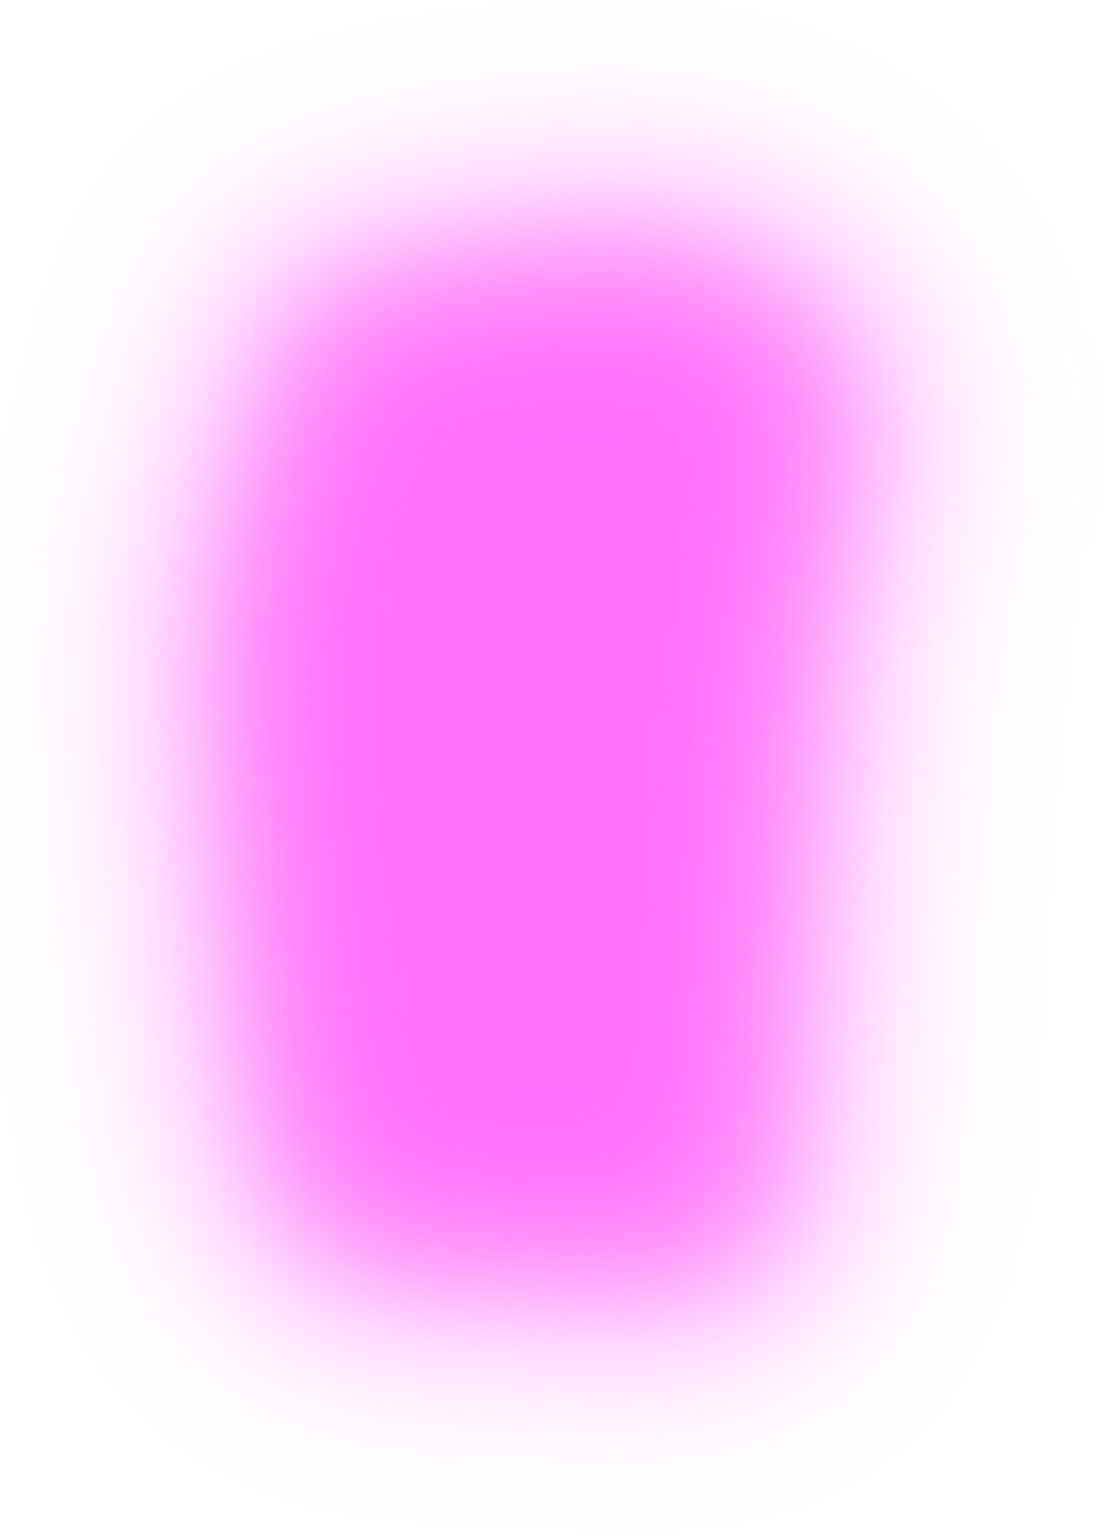 Pink blur abstract shape